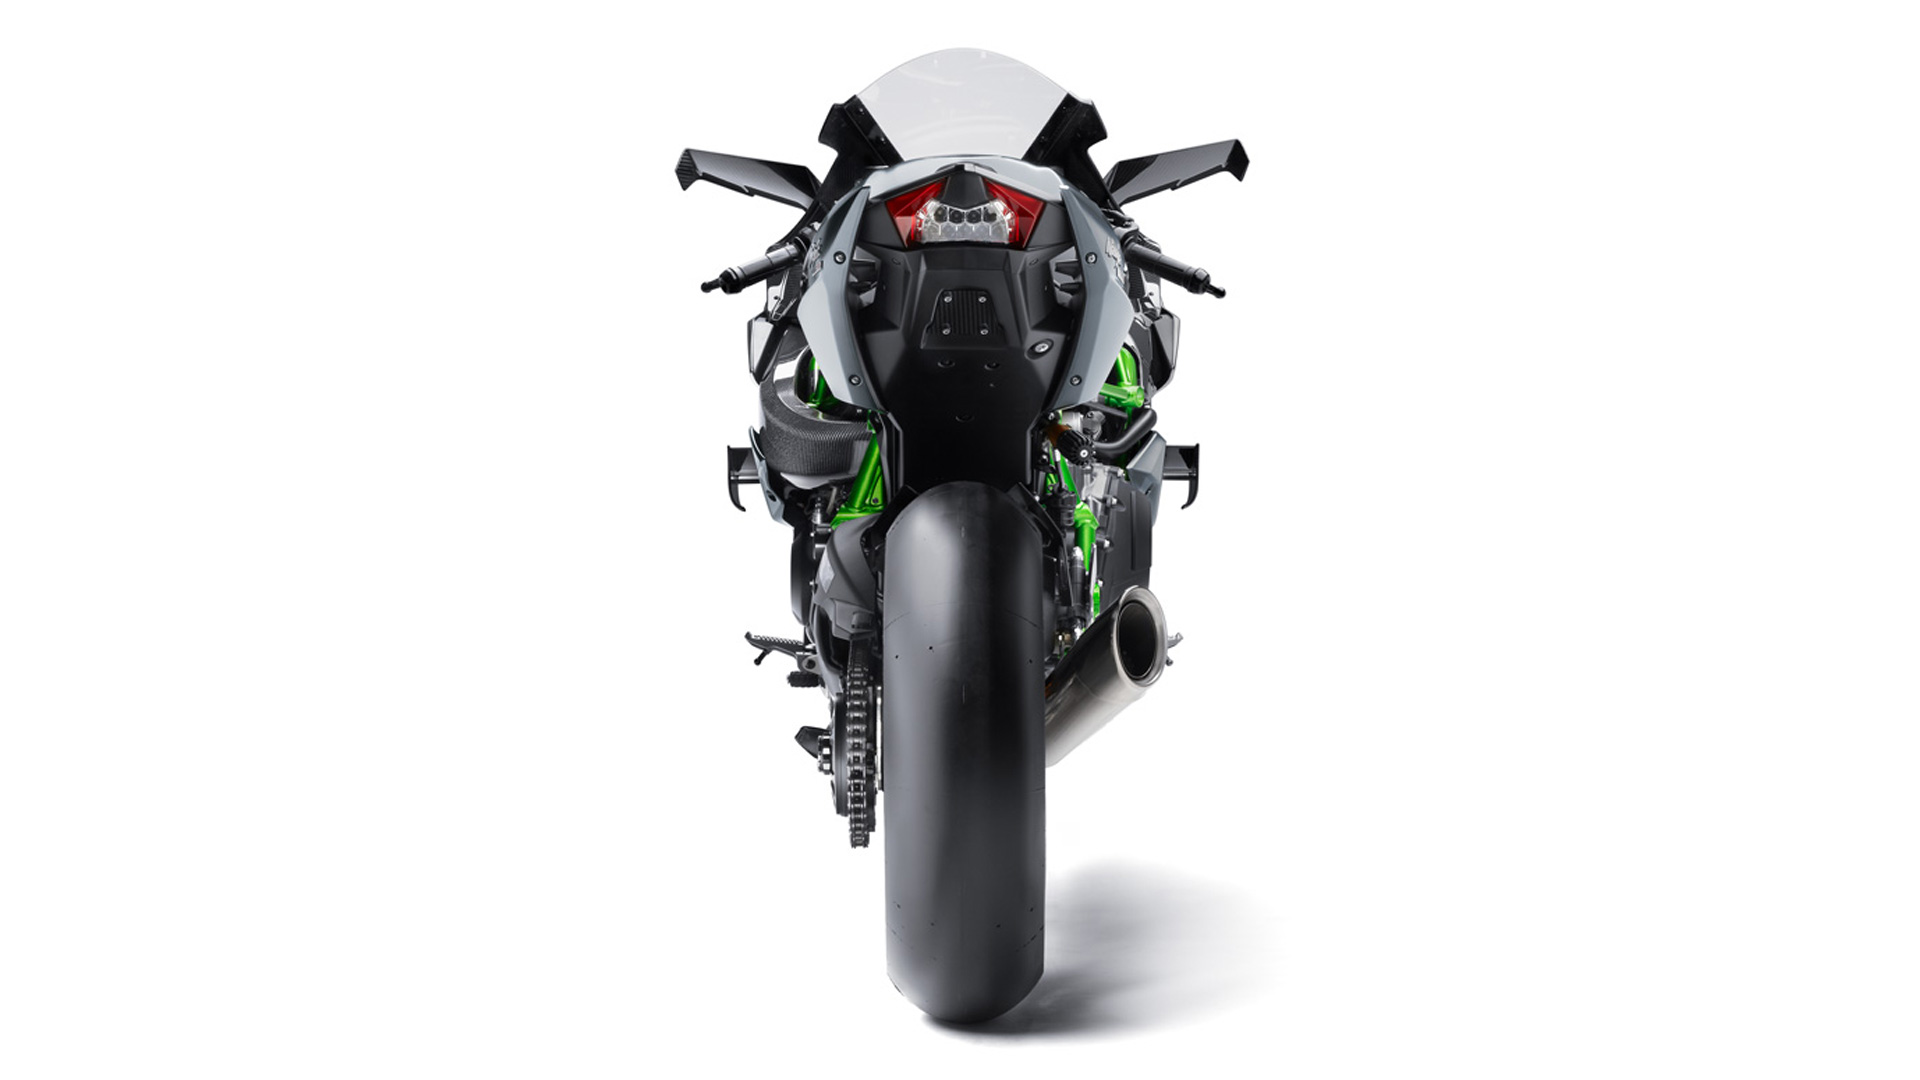 Ninja H2R 2017 - Price, Mileage, Reviews, Specification, Gallery - Overdrive